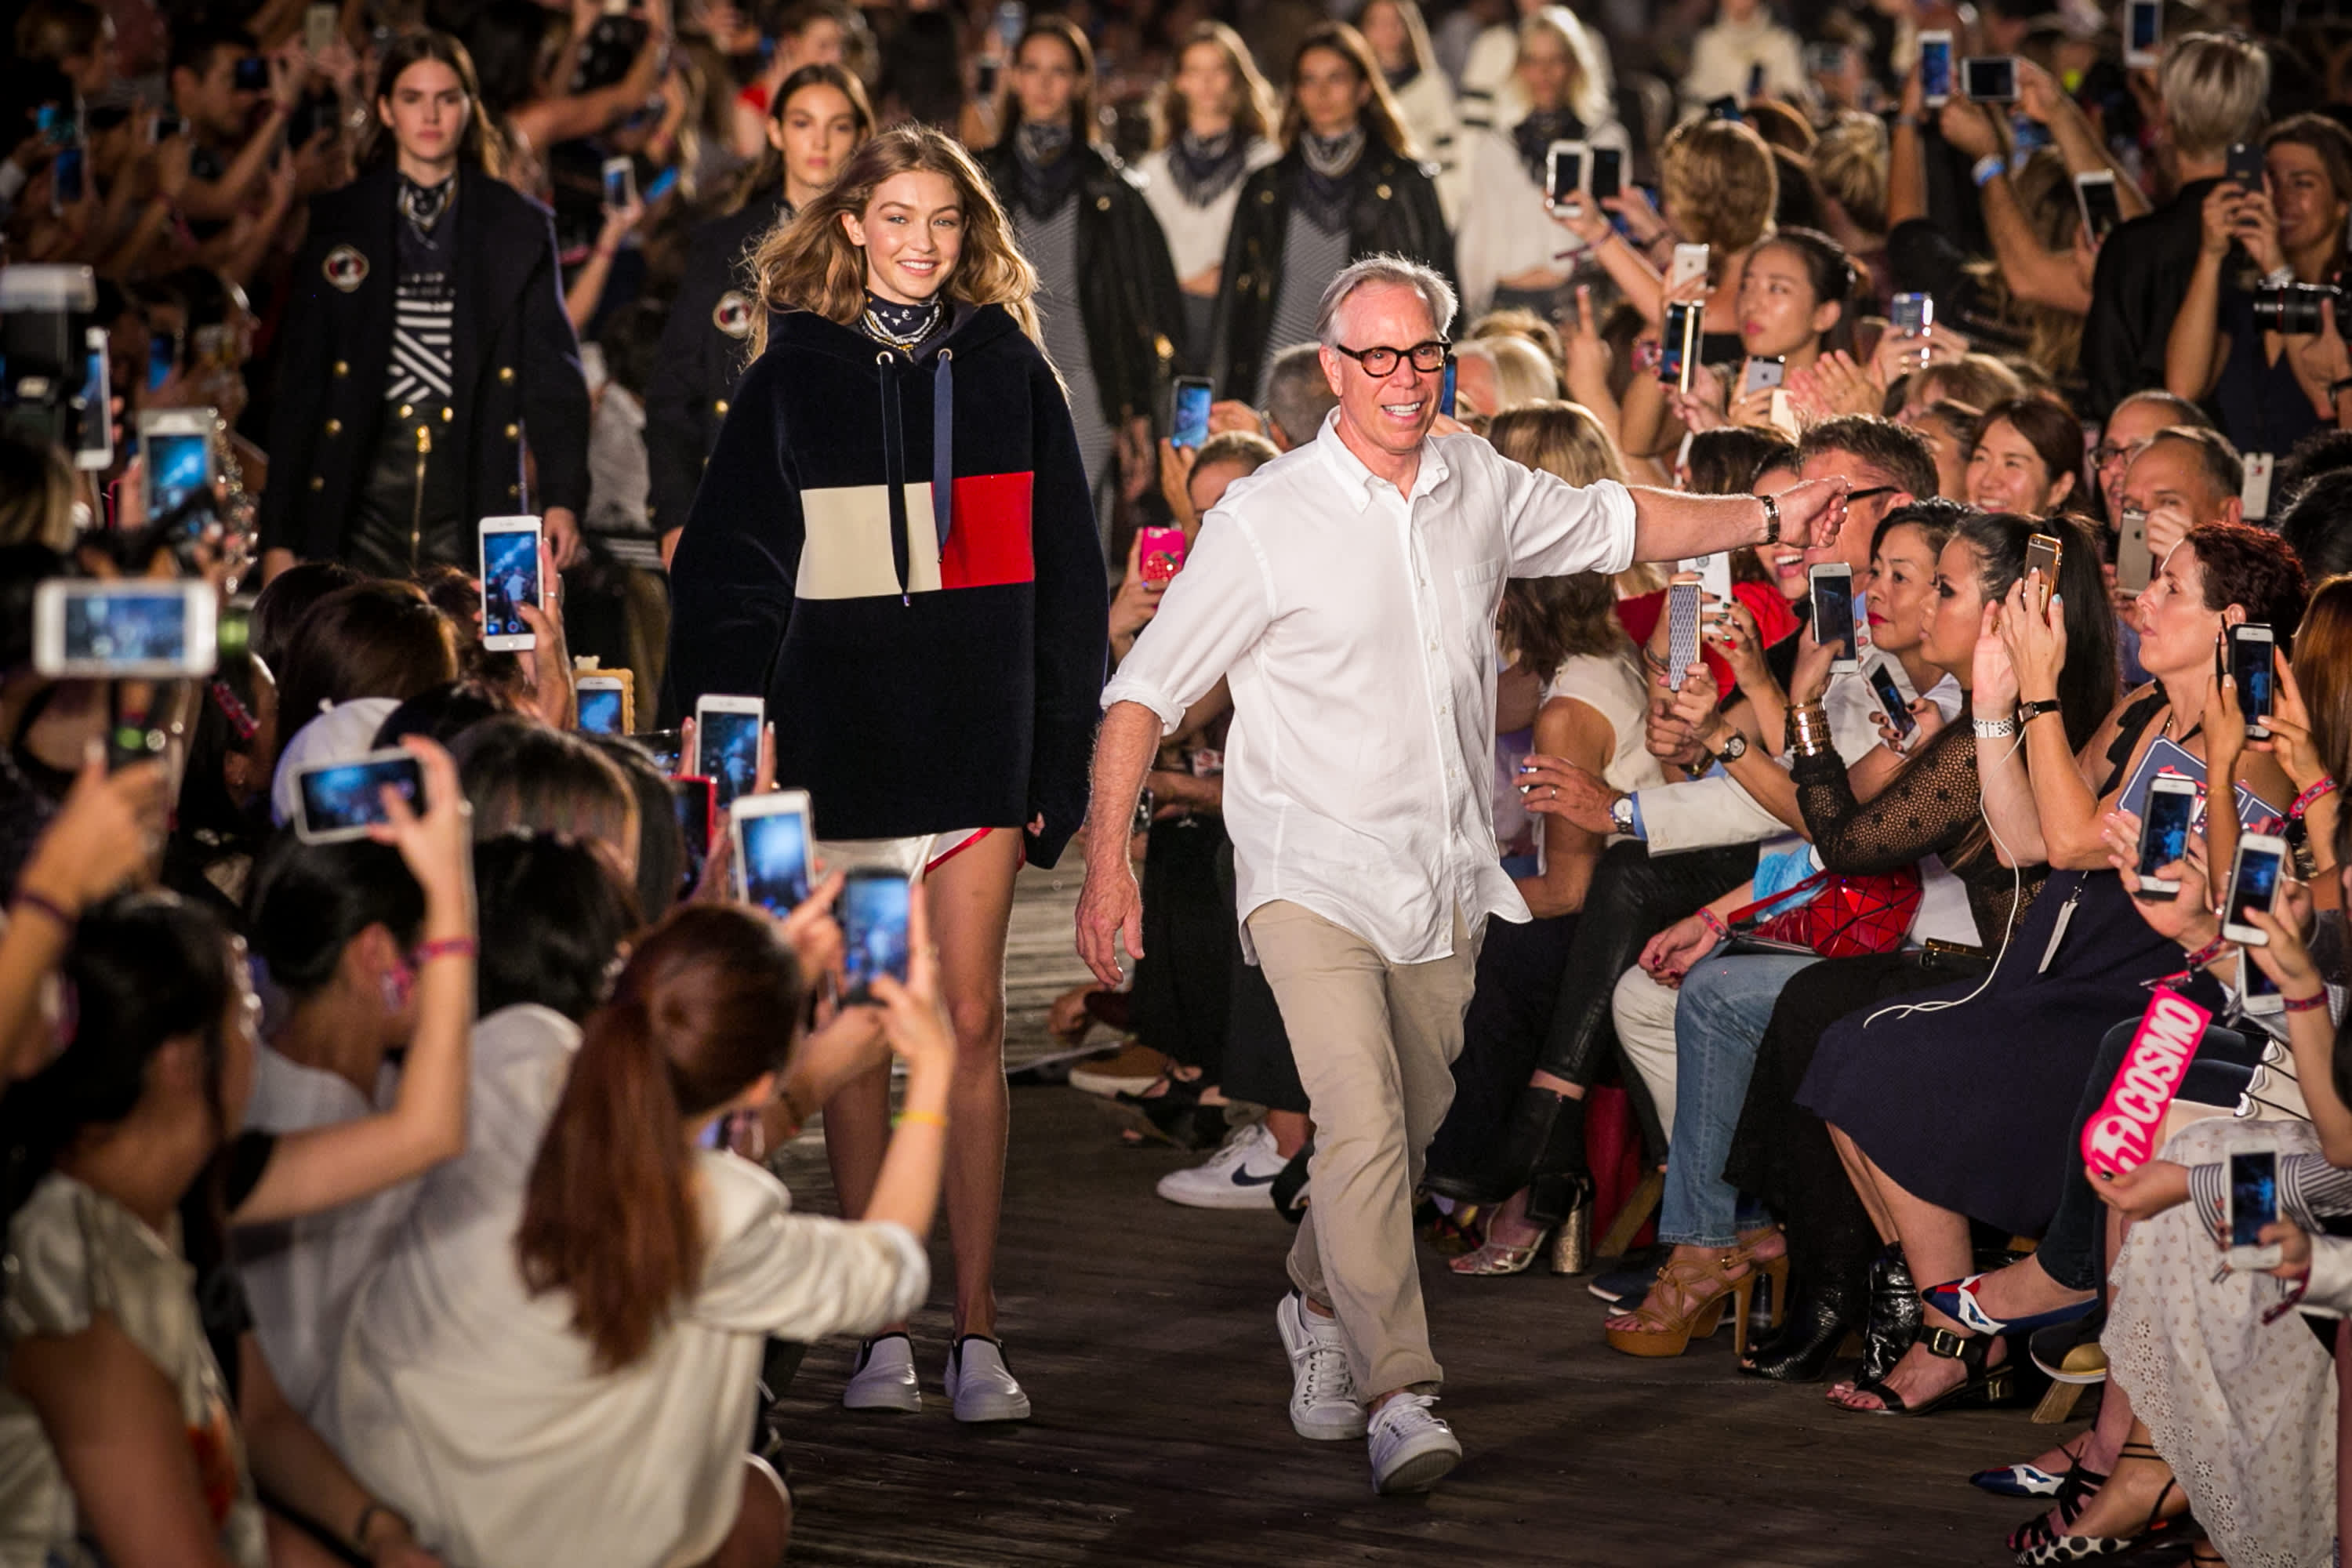 Tommy Hilfiger reinvented itself to 